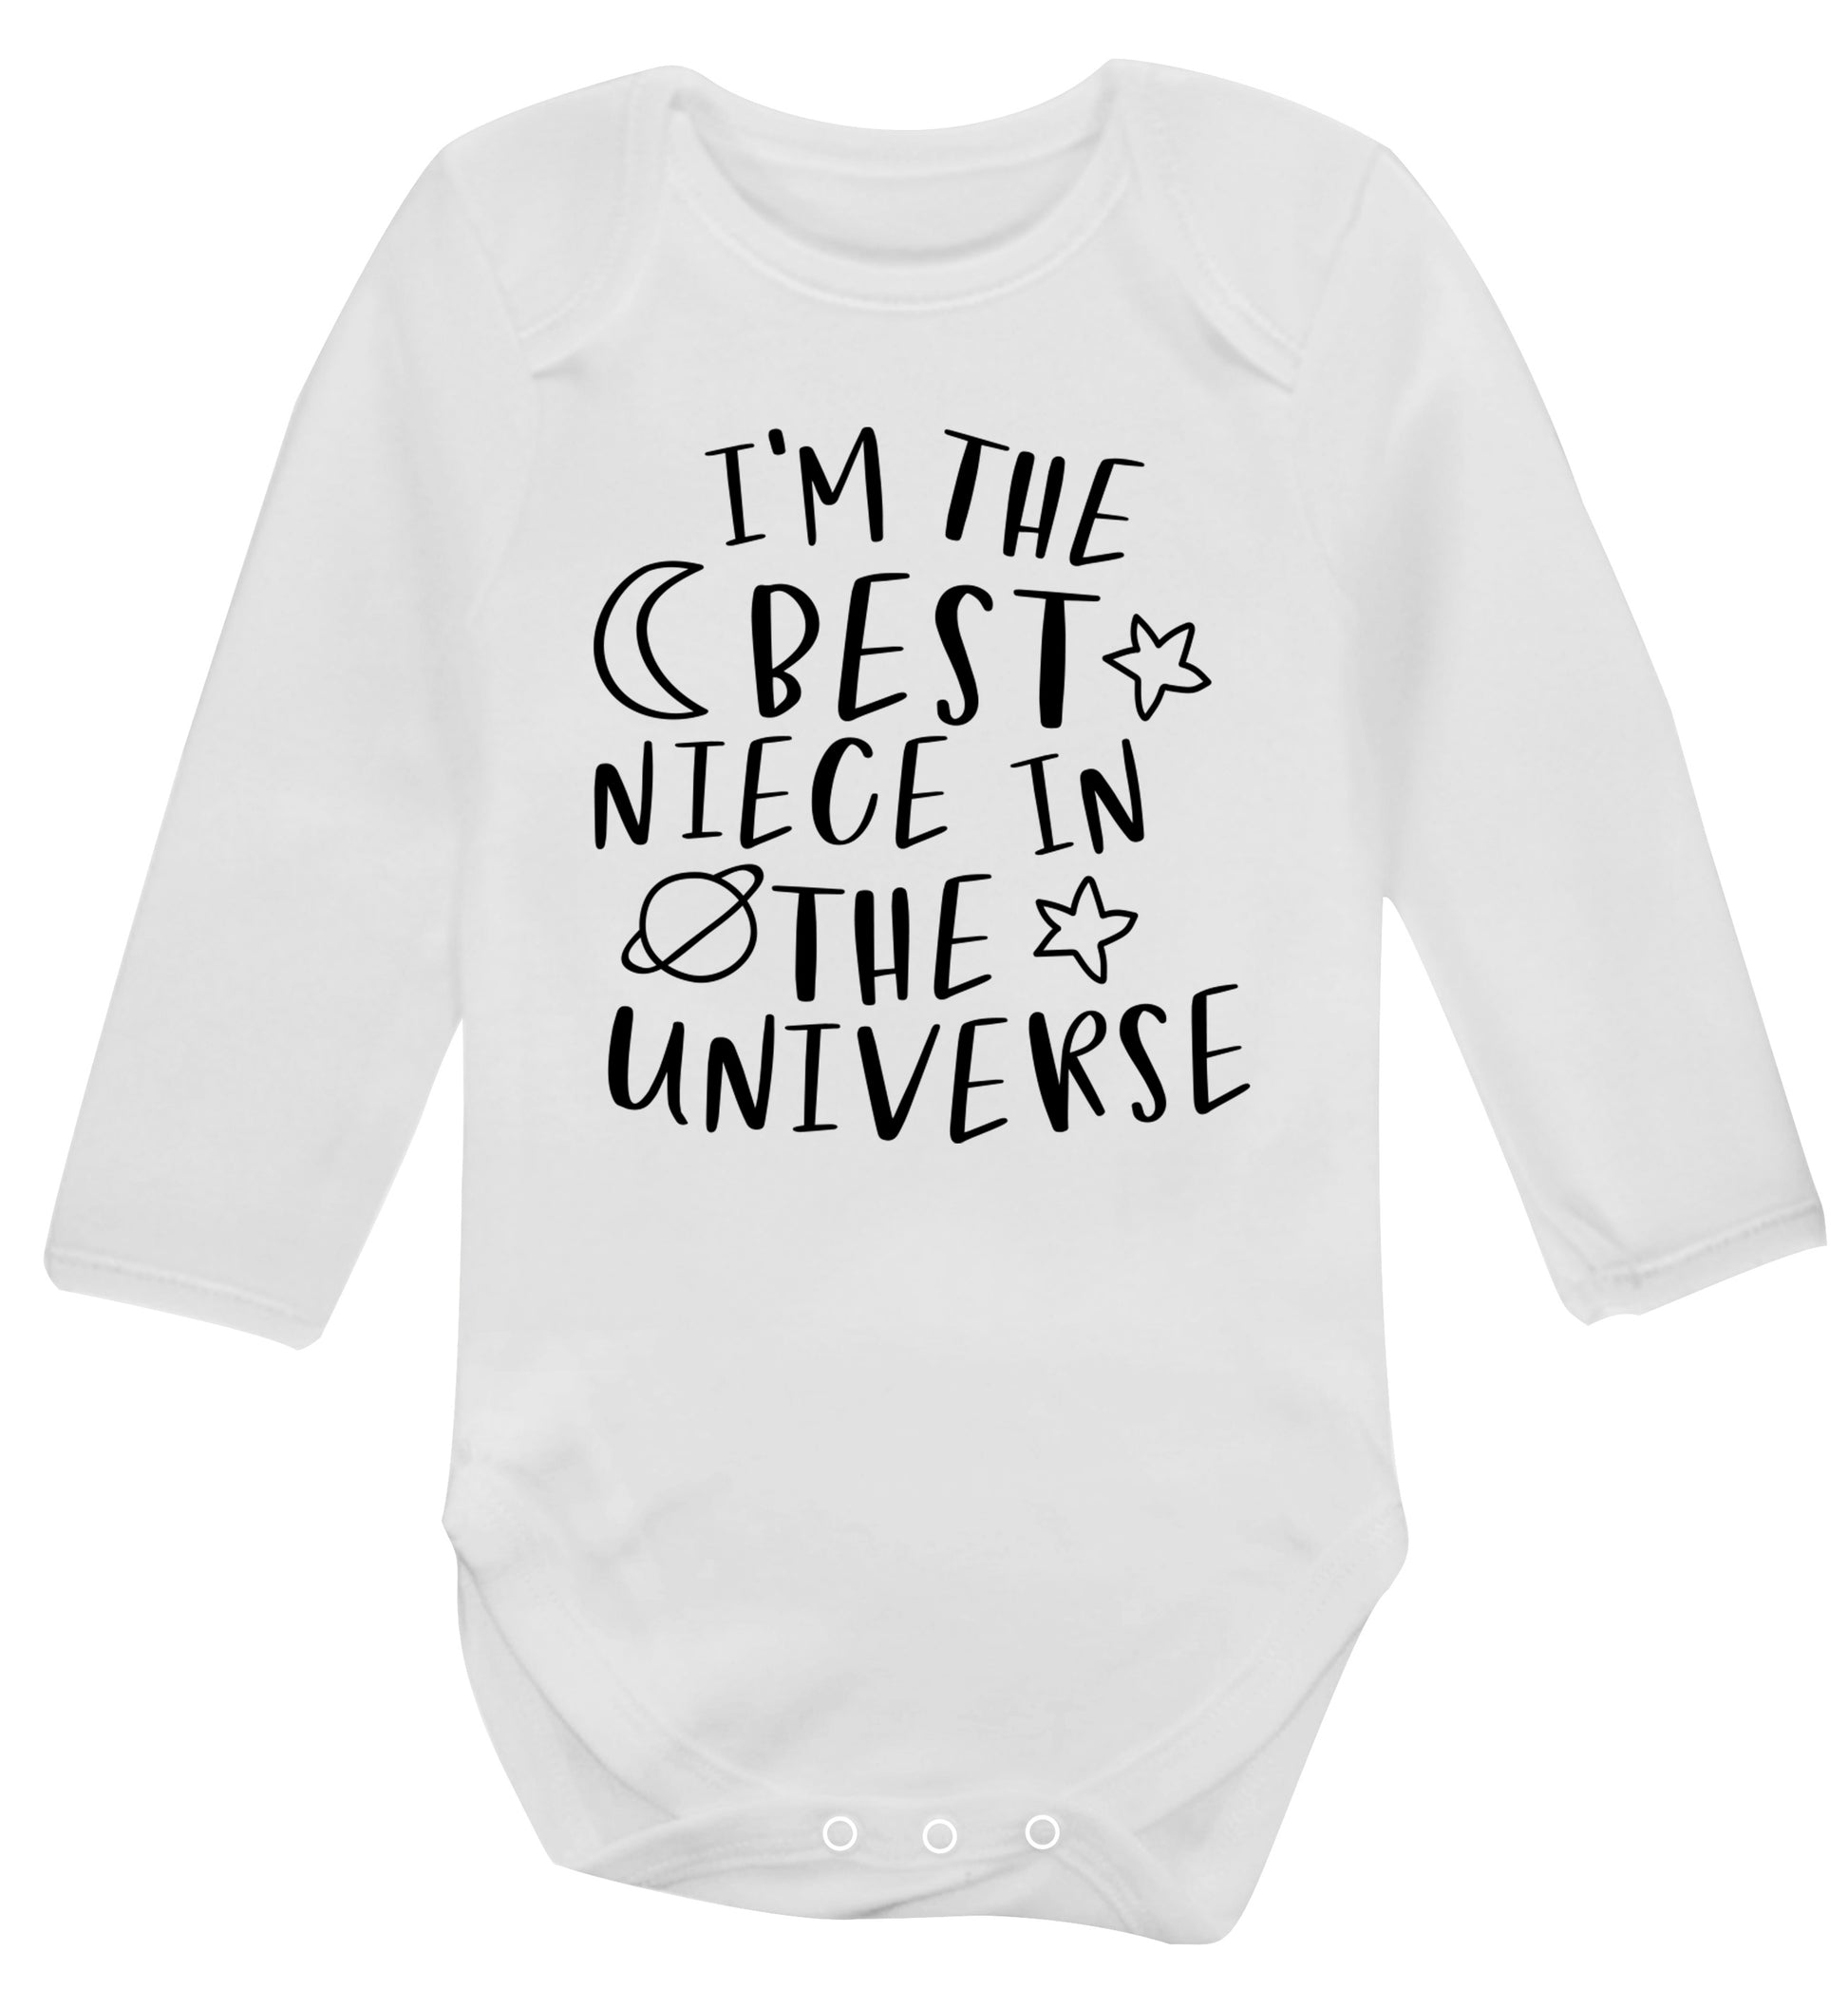 I'm the best niece in the universe Baby Vest long sleeved white 6-12 months